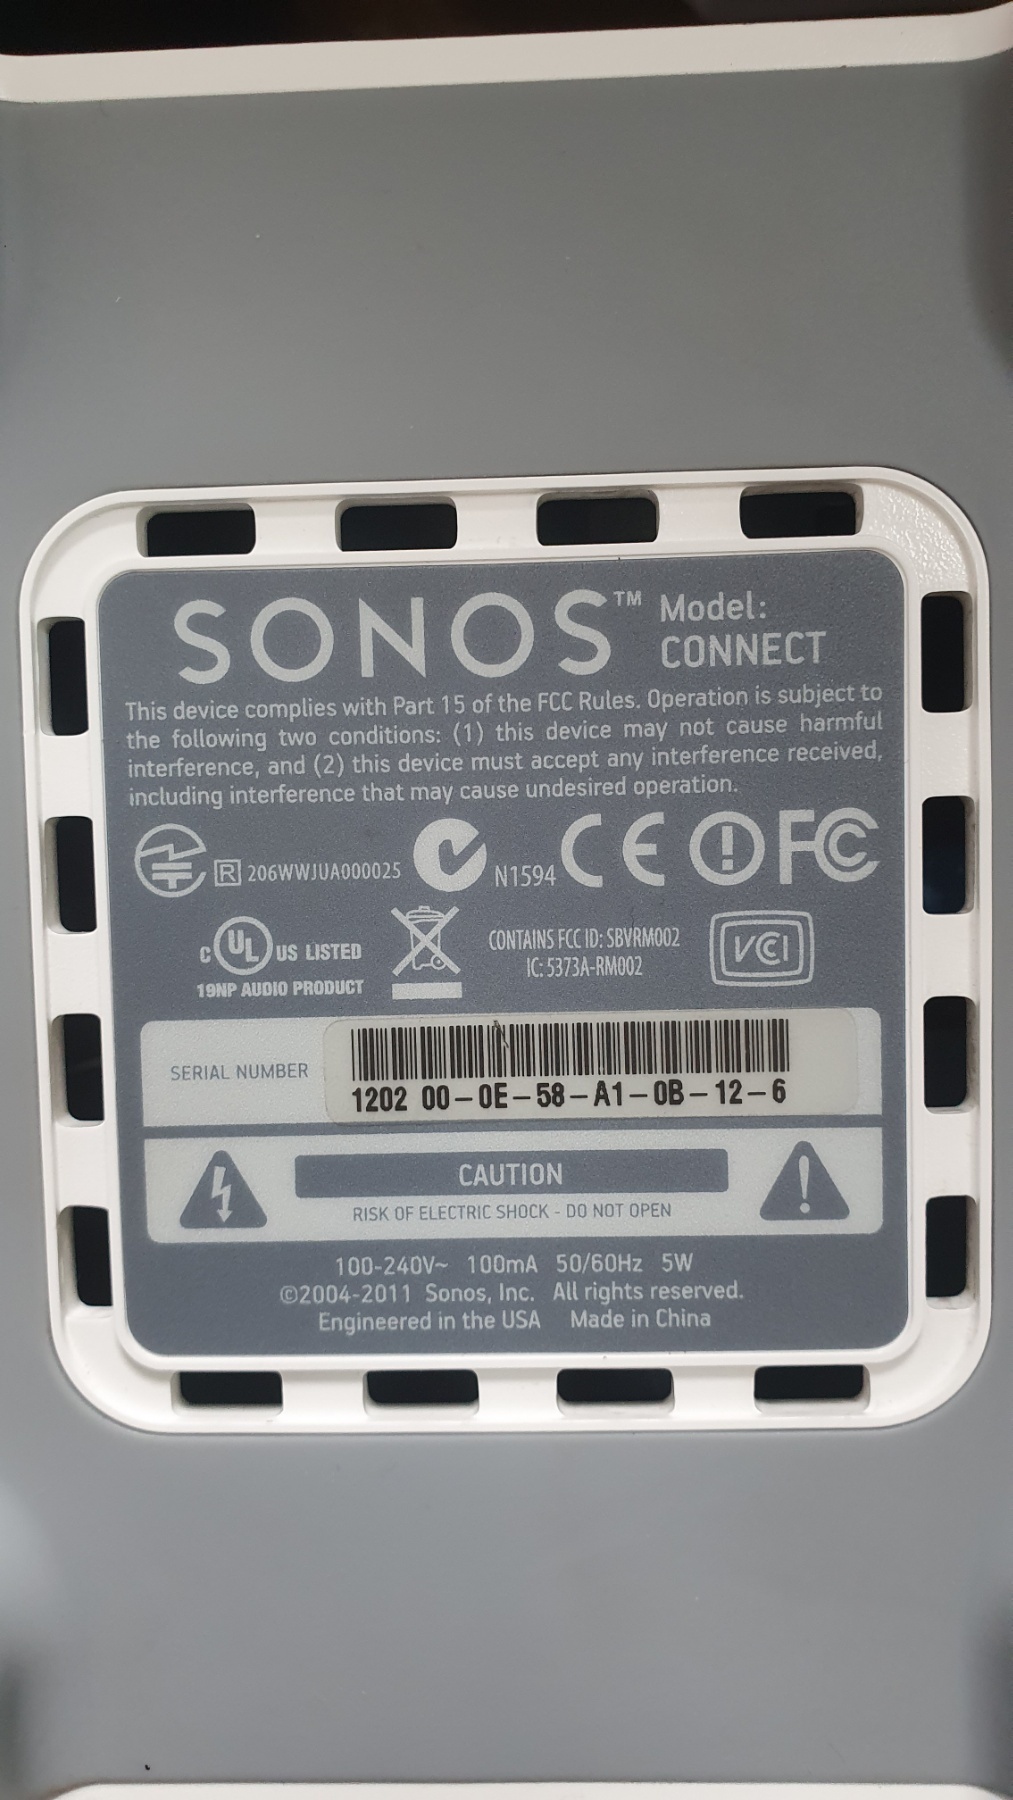 røgelse bønner metan Red light flashing continuously on Sonos Connect | Sonos Community